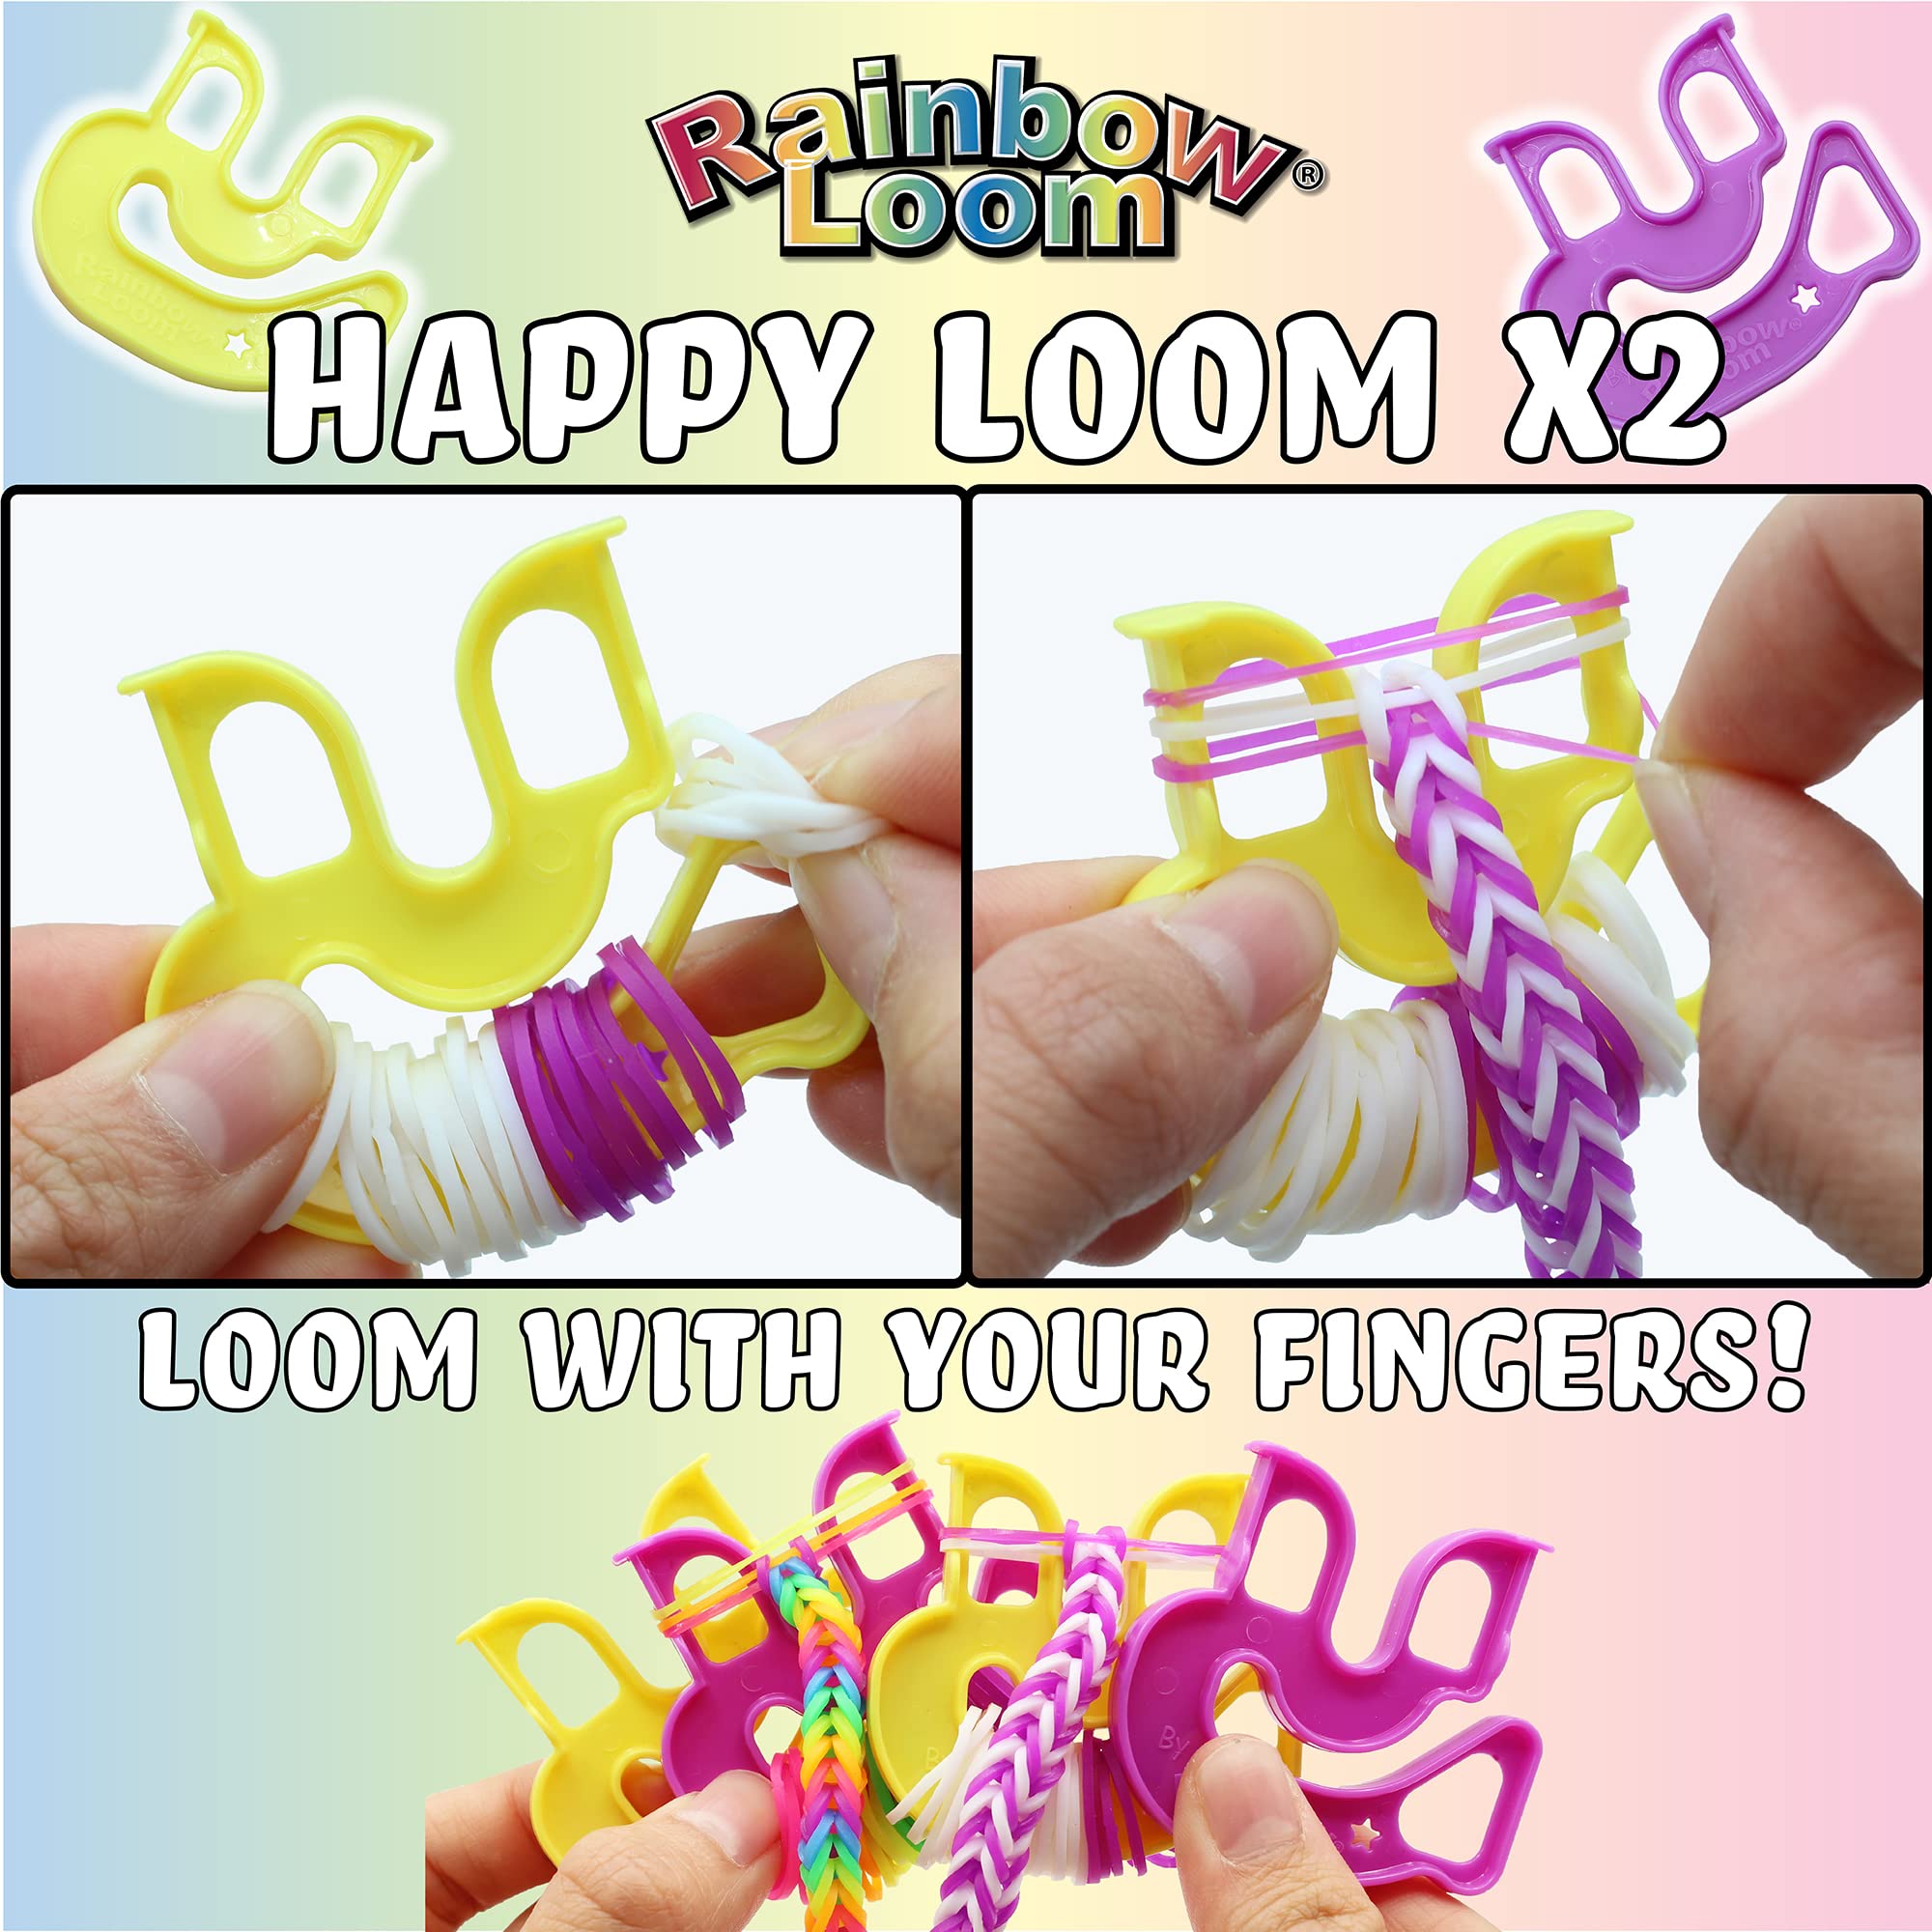 Rainbow Loom® Loomi-Pals Glow in The Dark Mega Combo Set Features 60 Cute Assorted LP Charms, The New RL2.0, Alpha & Pony Beads, 17 Colored Bands (2 Glow) All in a Carrying Case for Boys and Girls 7+